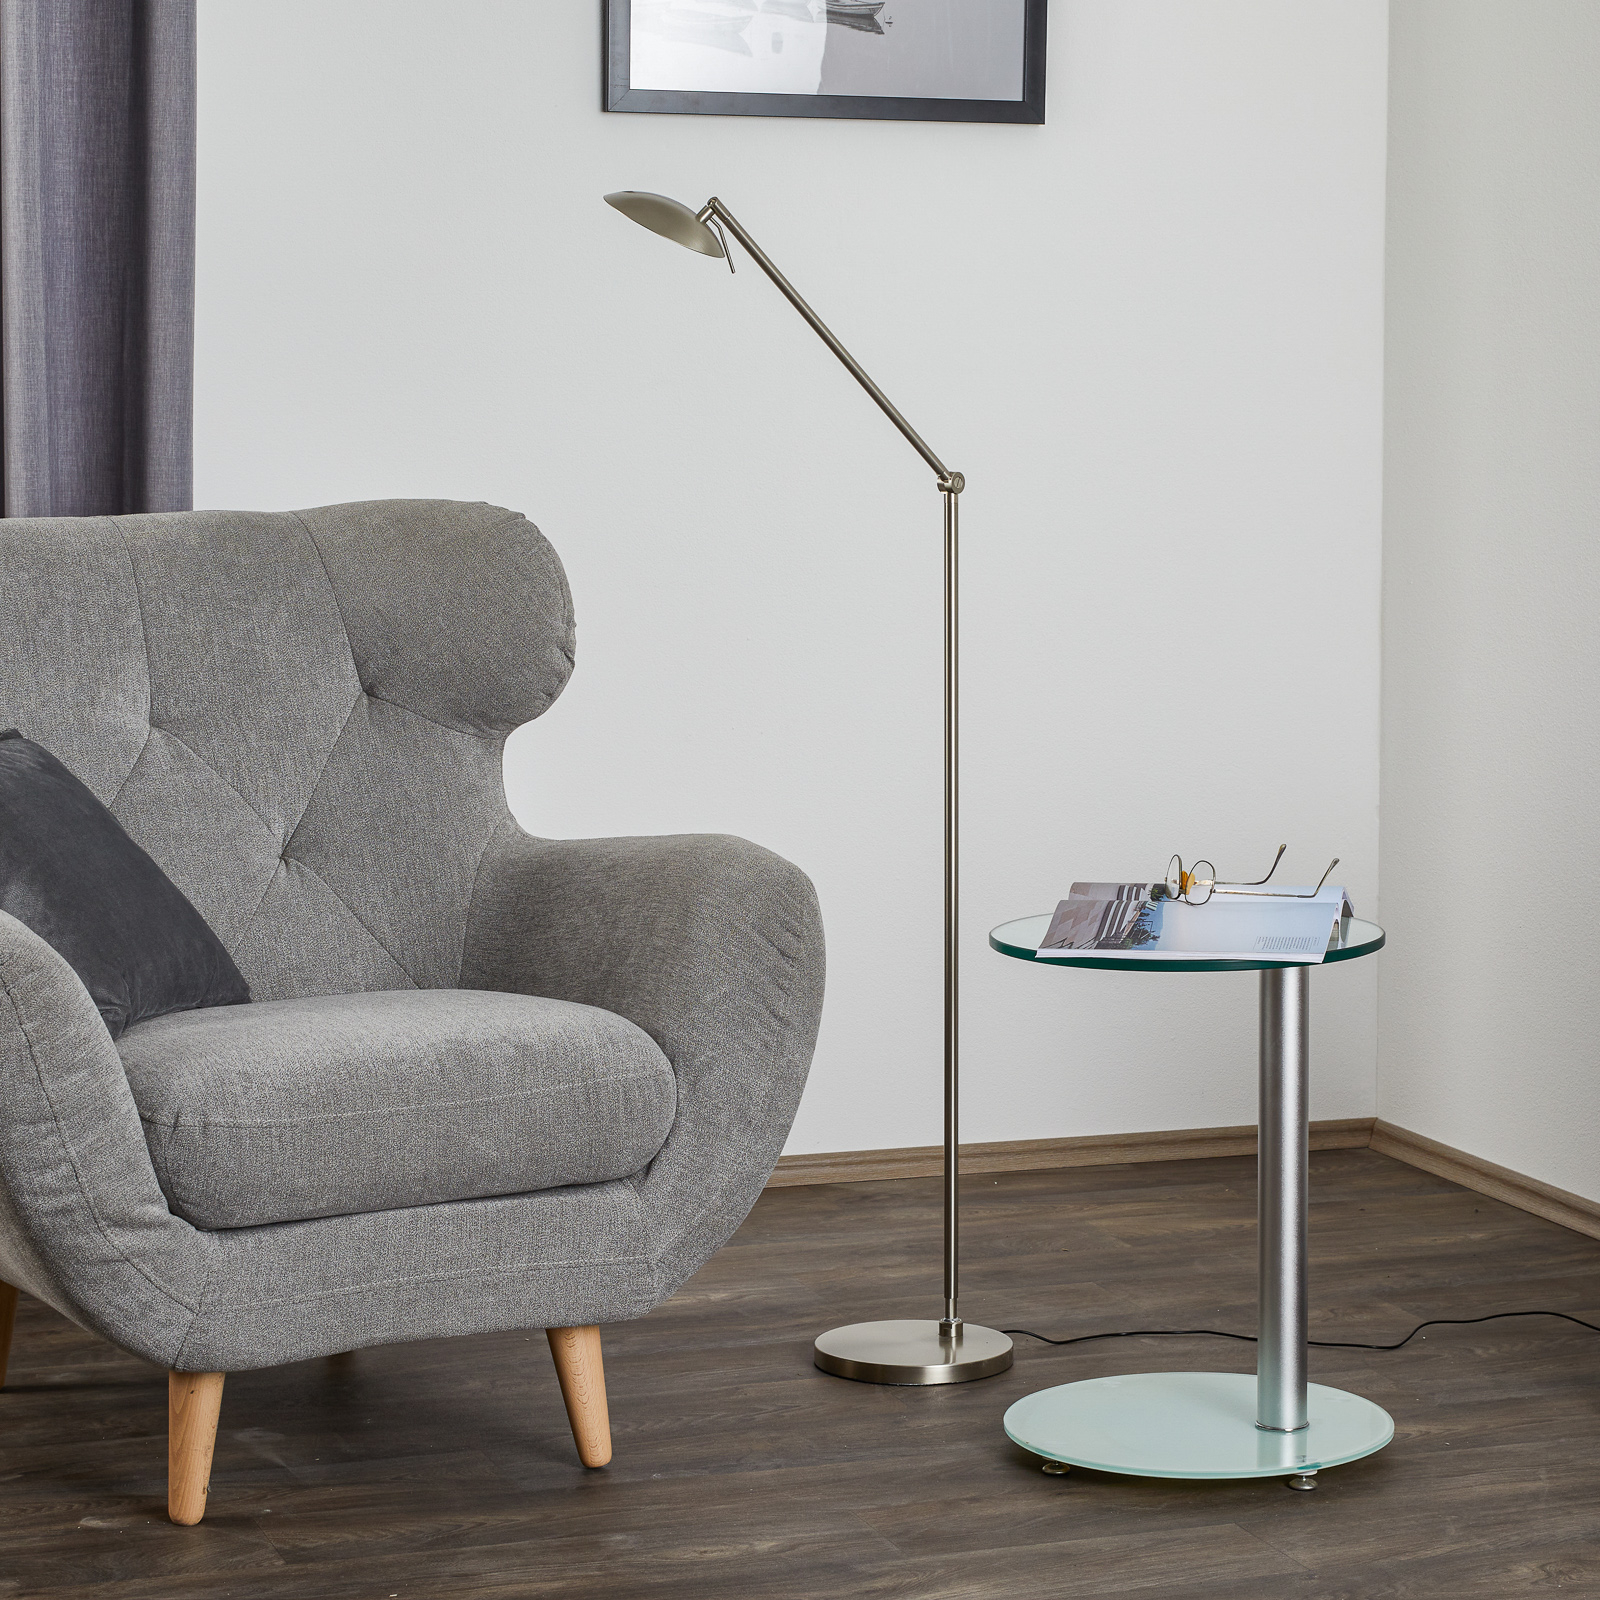 TIJA tilting LED floor lamp with touch dimmer